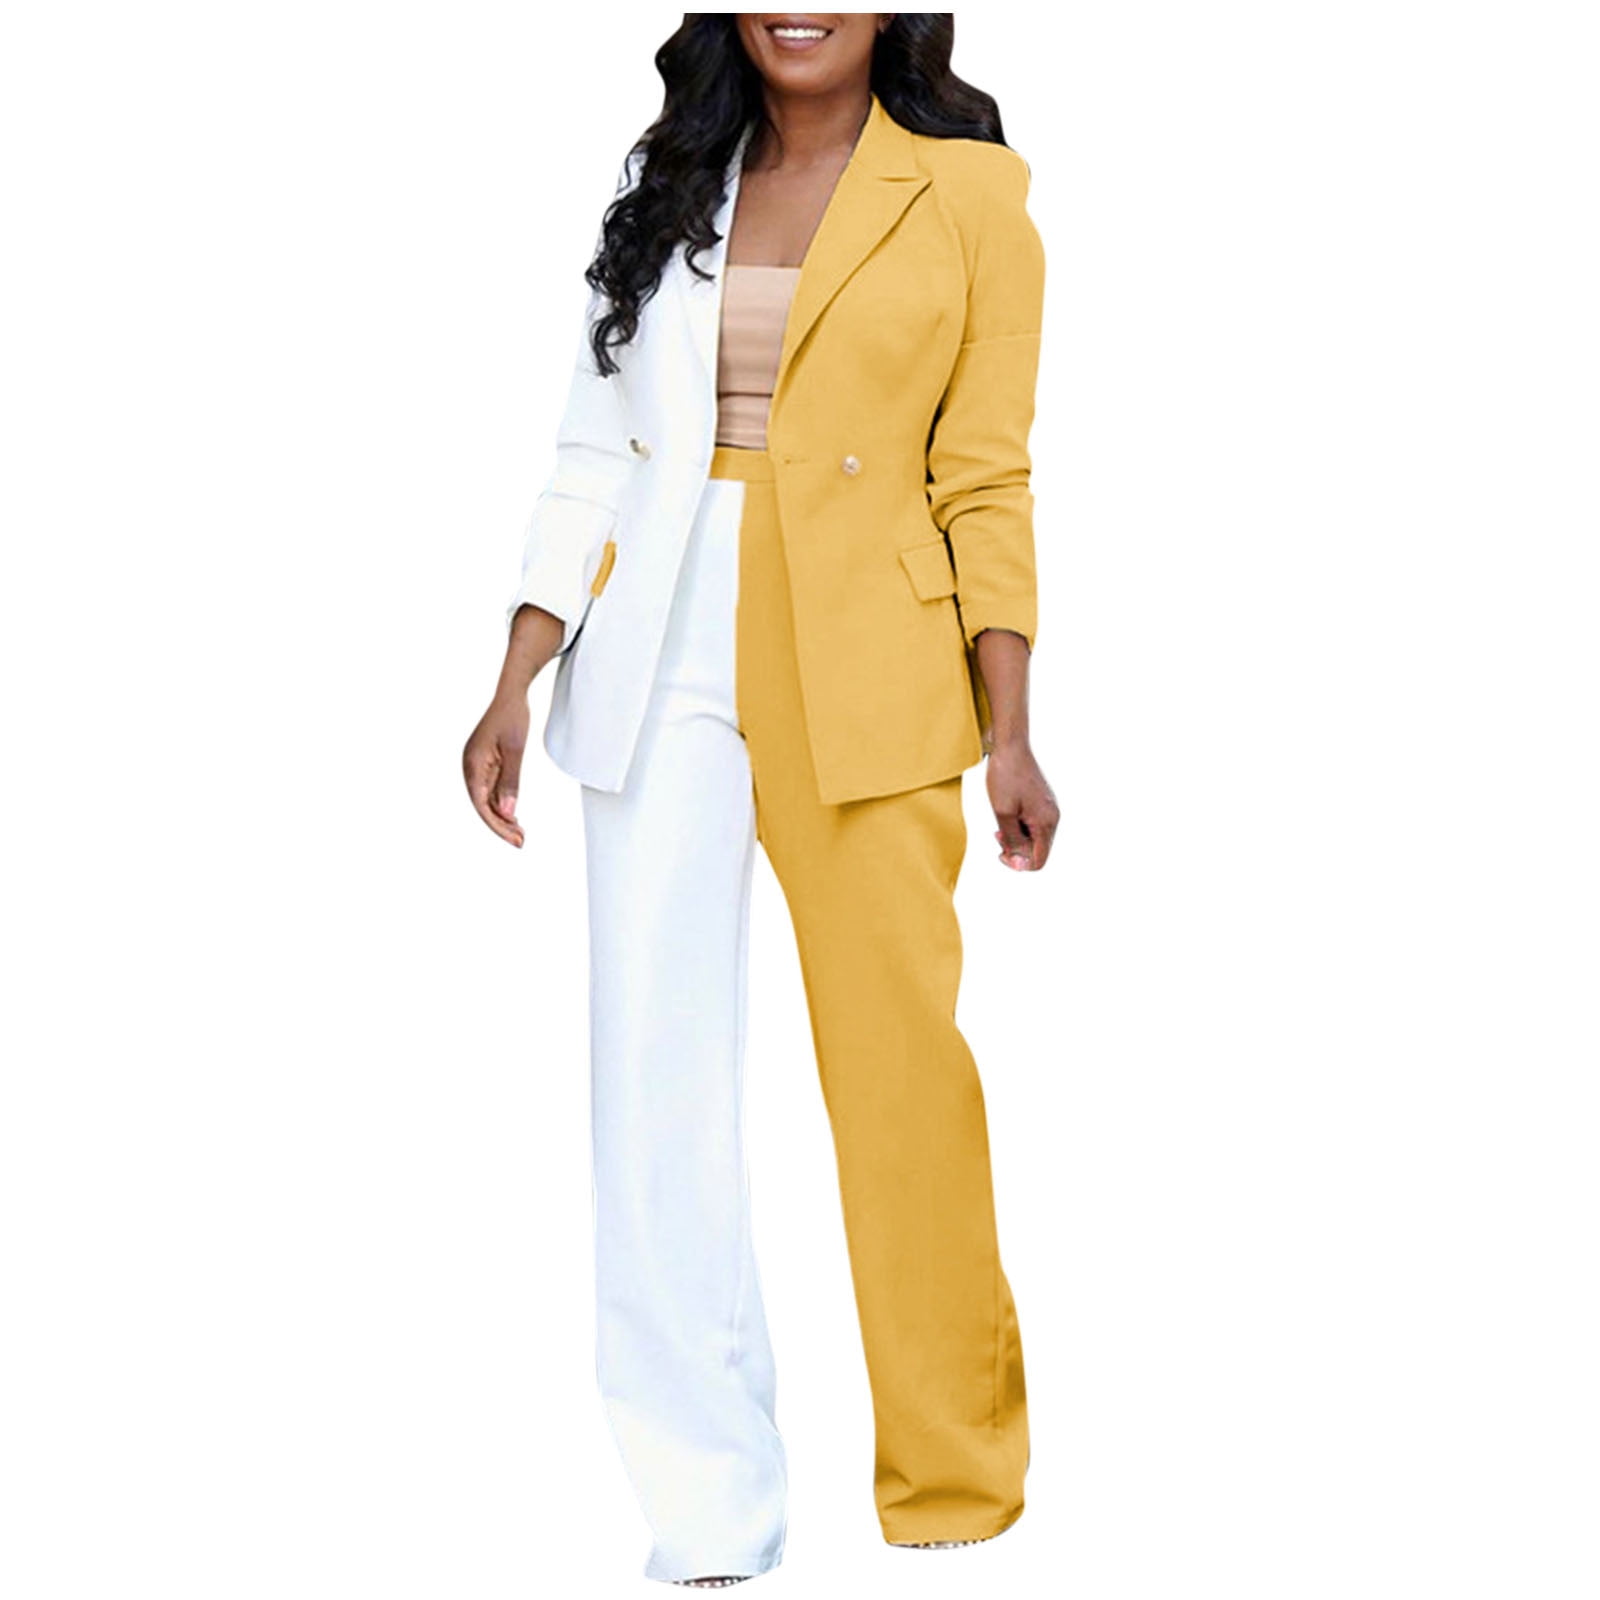 Wedding Pant Suits for Bride Women 2 Piece Outfits Suits Set Long Sleeve  Button Blazer High Waisted Pants Jumpsuit Chest High Insulated Snow Bib